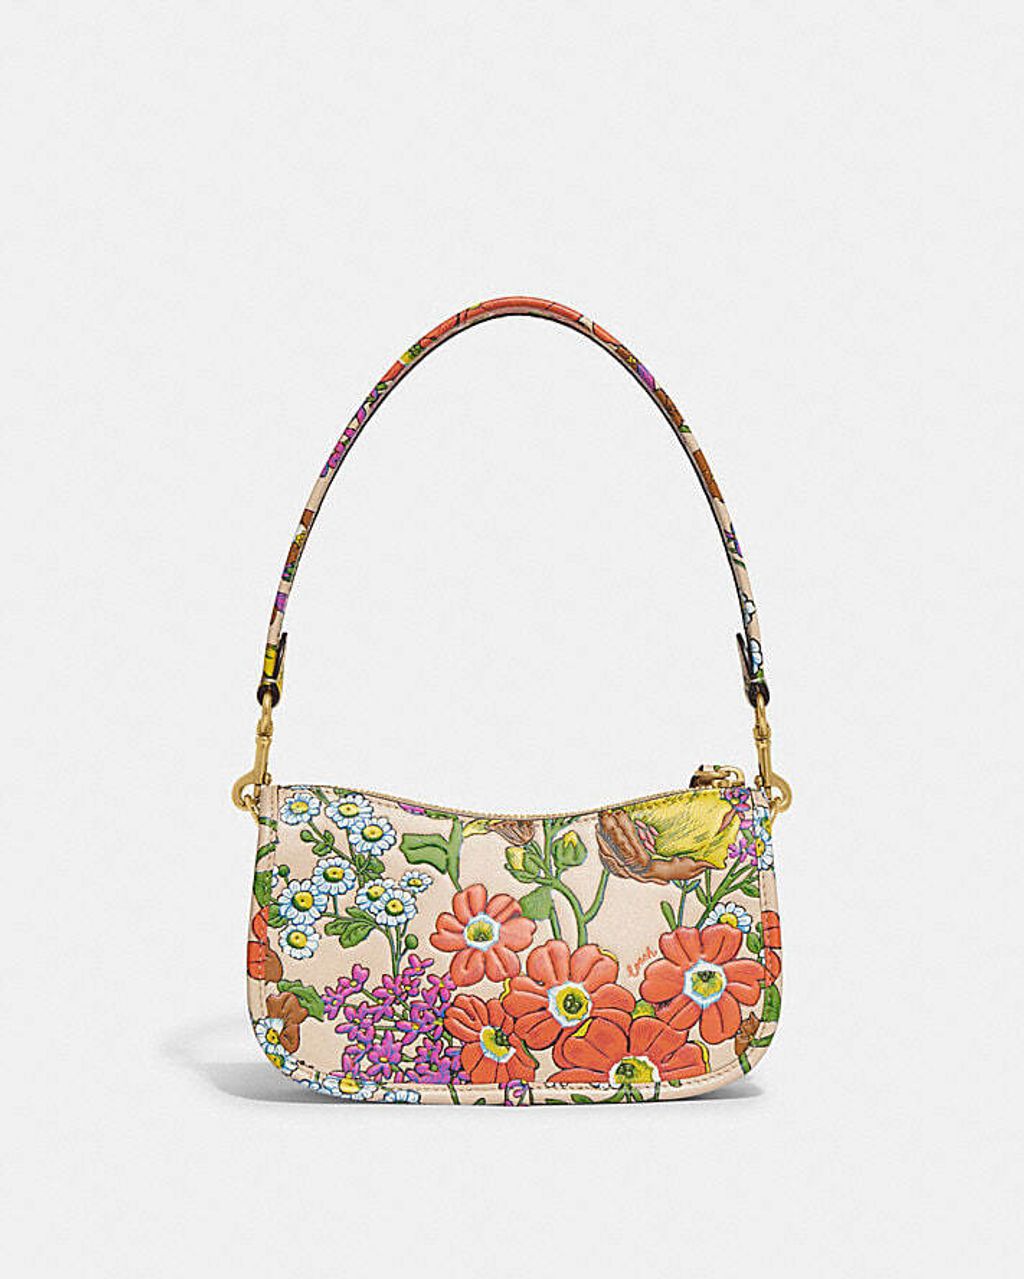 handbagbranded.com getlush outlet personalshopper usa malaysia ready stock coach Coach SWINGER 20 WITH FLORAL PRINT 2